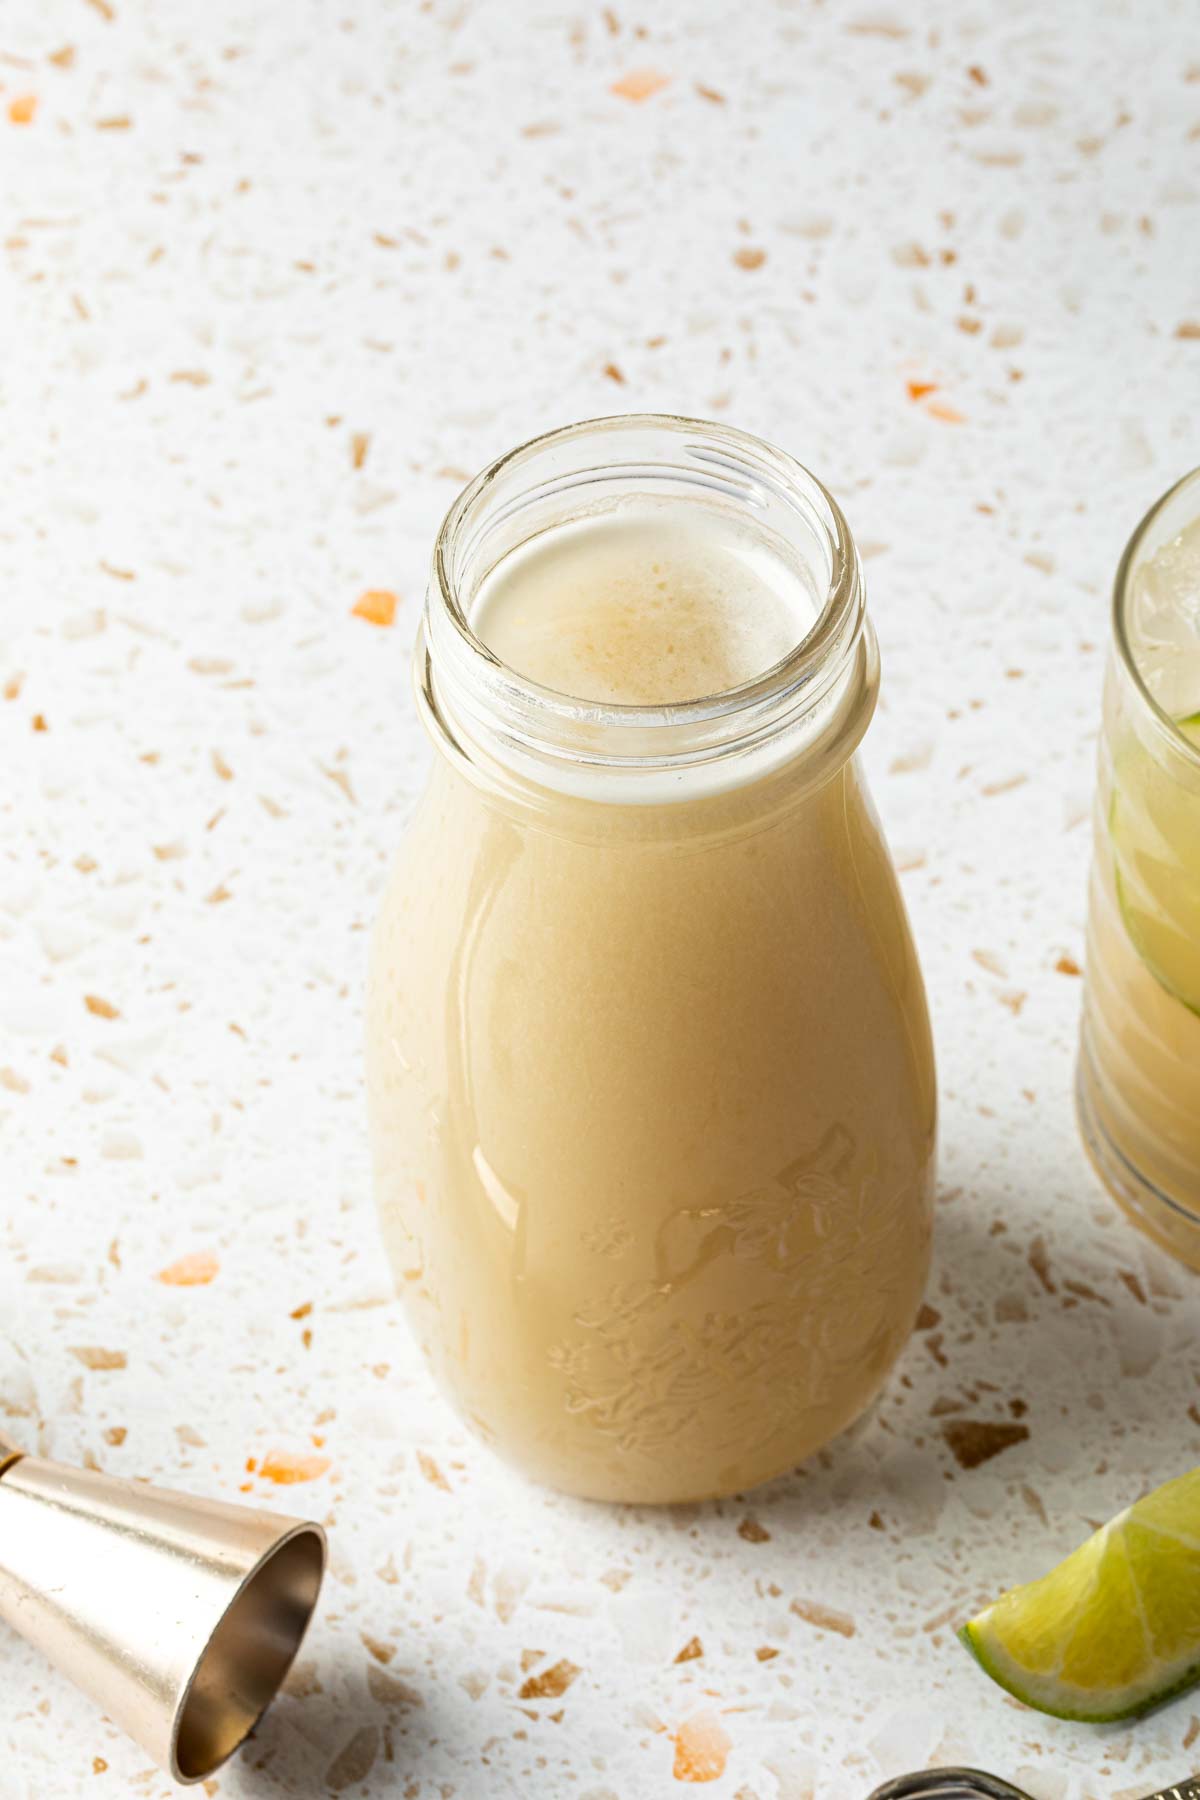 A bottle of homemade rich simple syrup made from almond milk. 